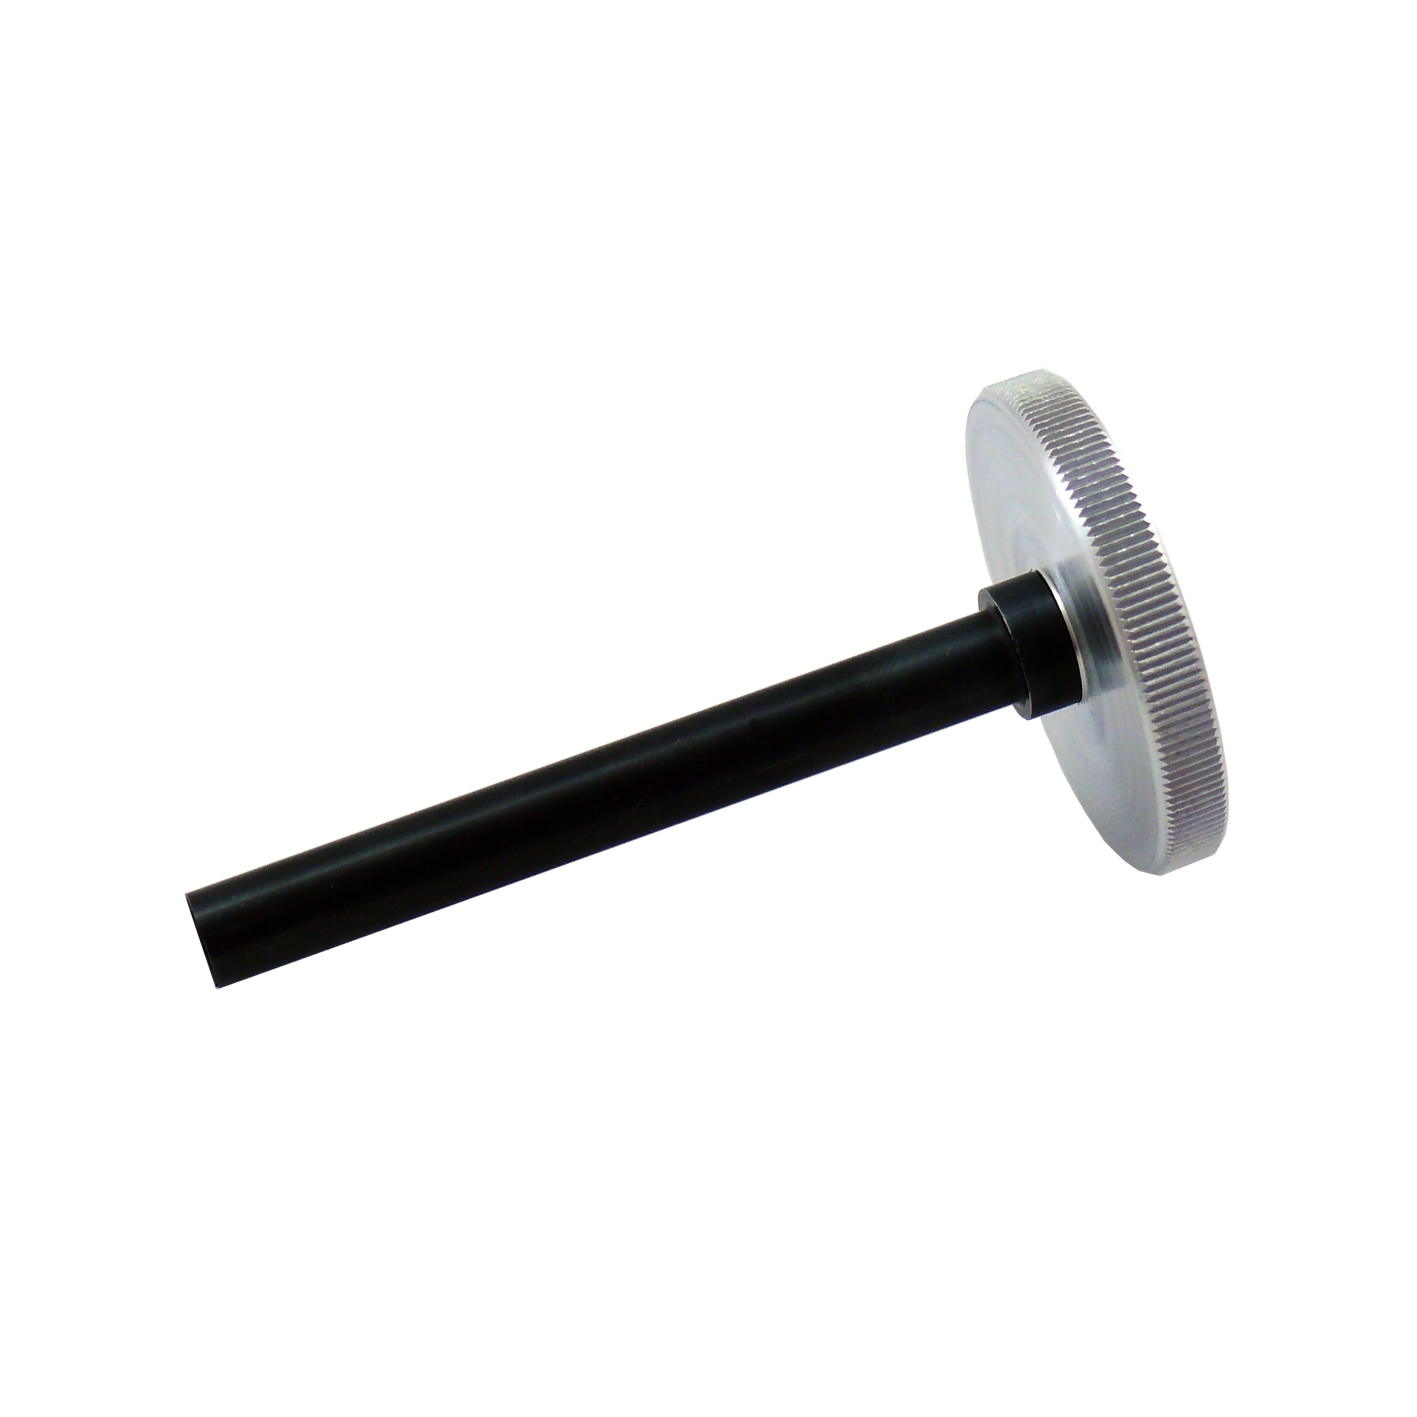 Pull stud for tailstock and headstock